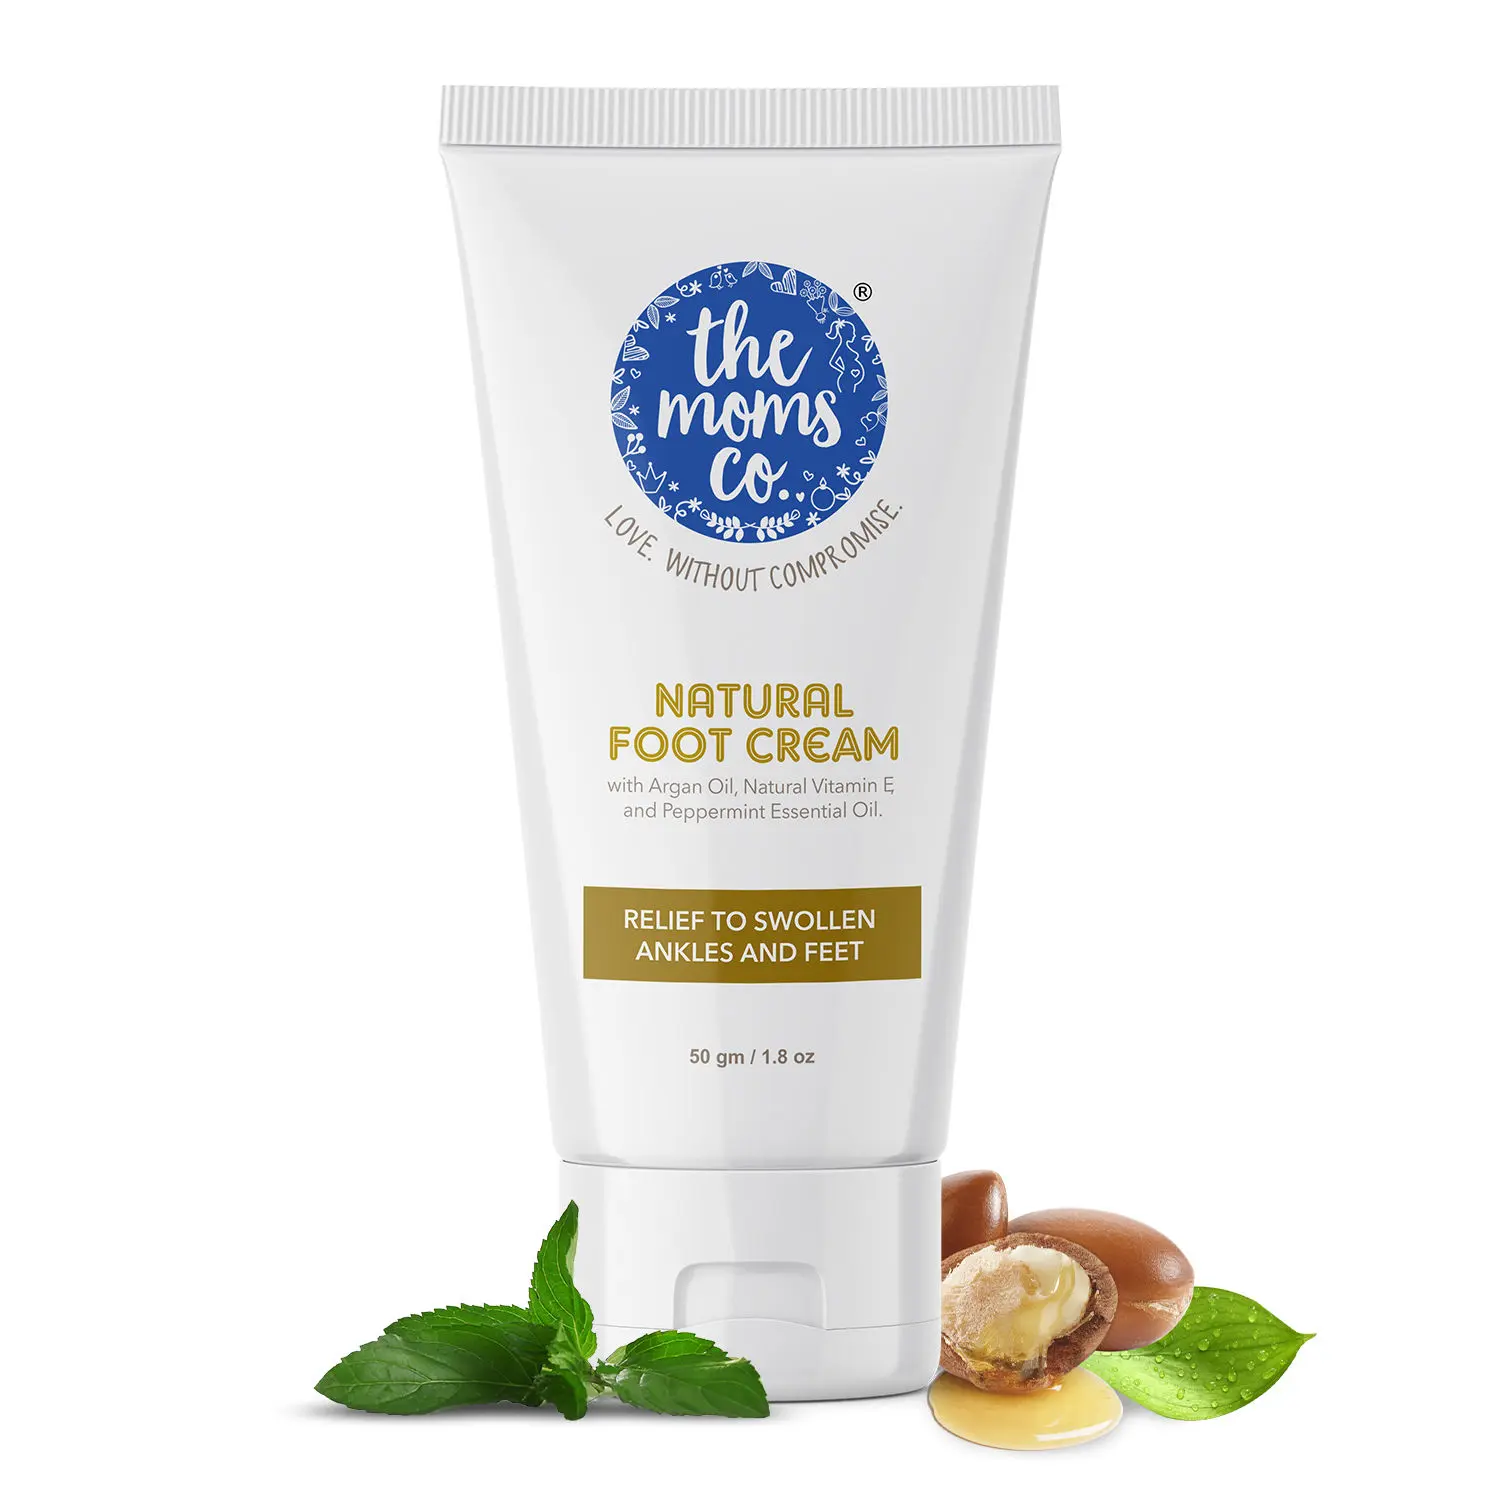 The Moms Co. Natural Foot Cream (50 g)